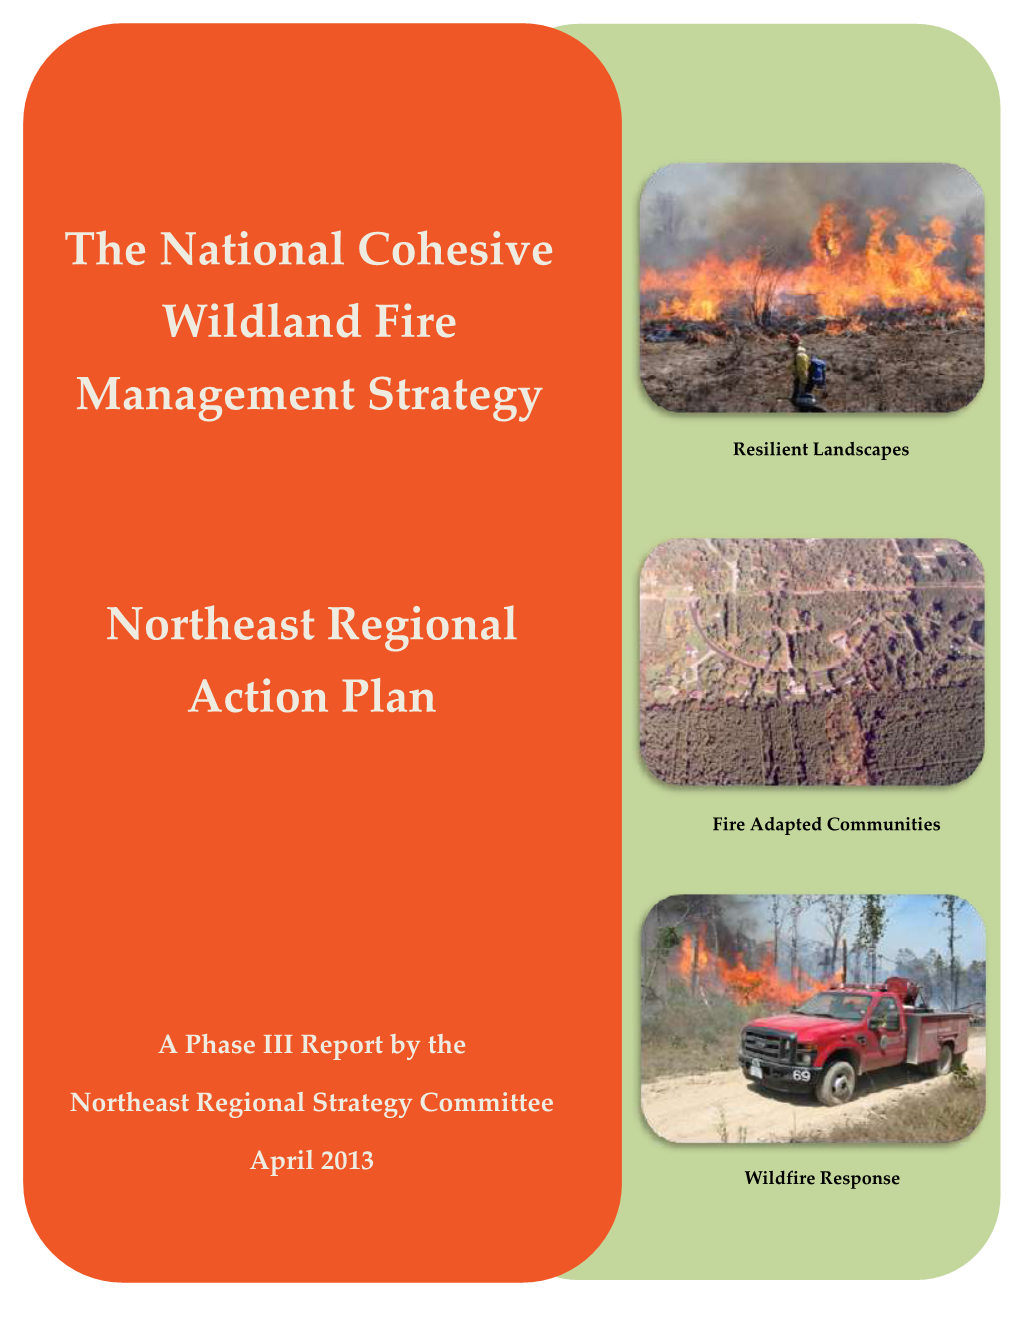 The National Cohesive Wildland Fire Management Strategy